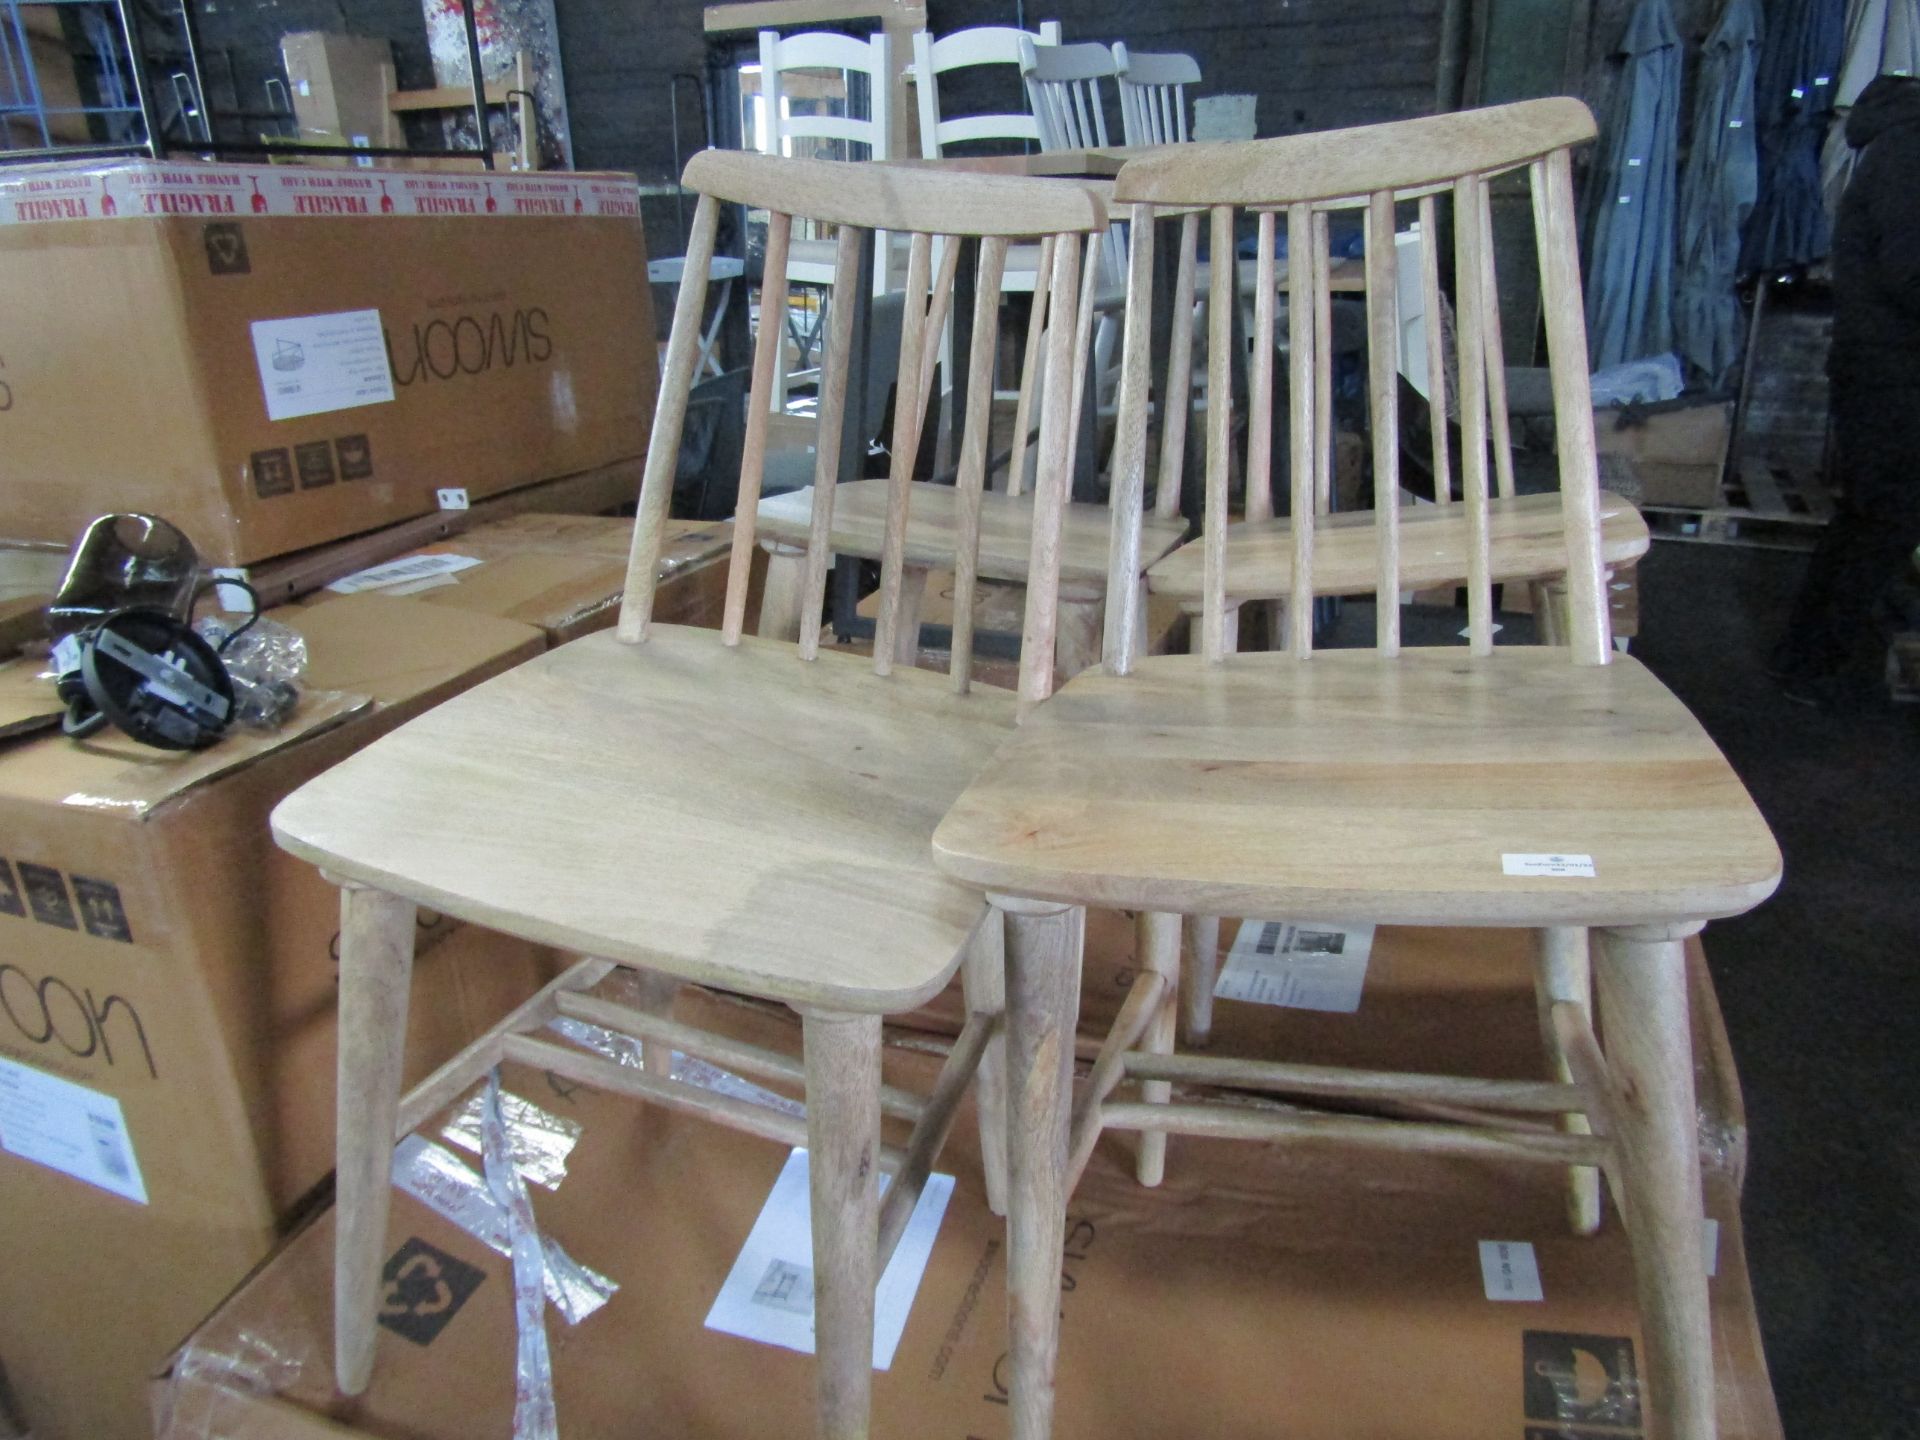 Swoon Set of 2 Ollie Dining Chairs, Natural Mango Wood - Good Condition & Boxed - RRP £349